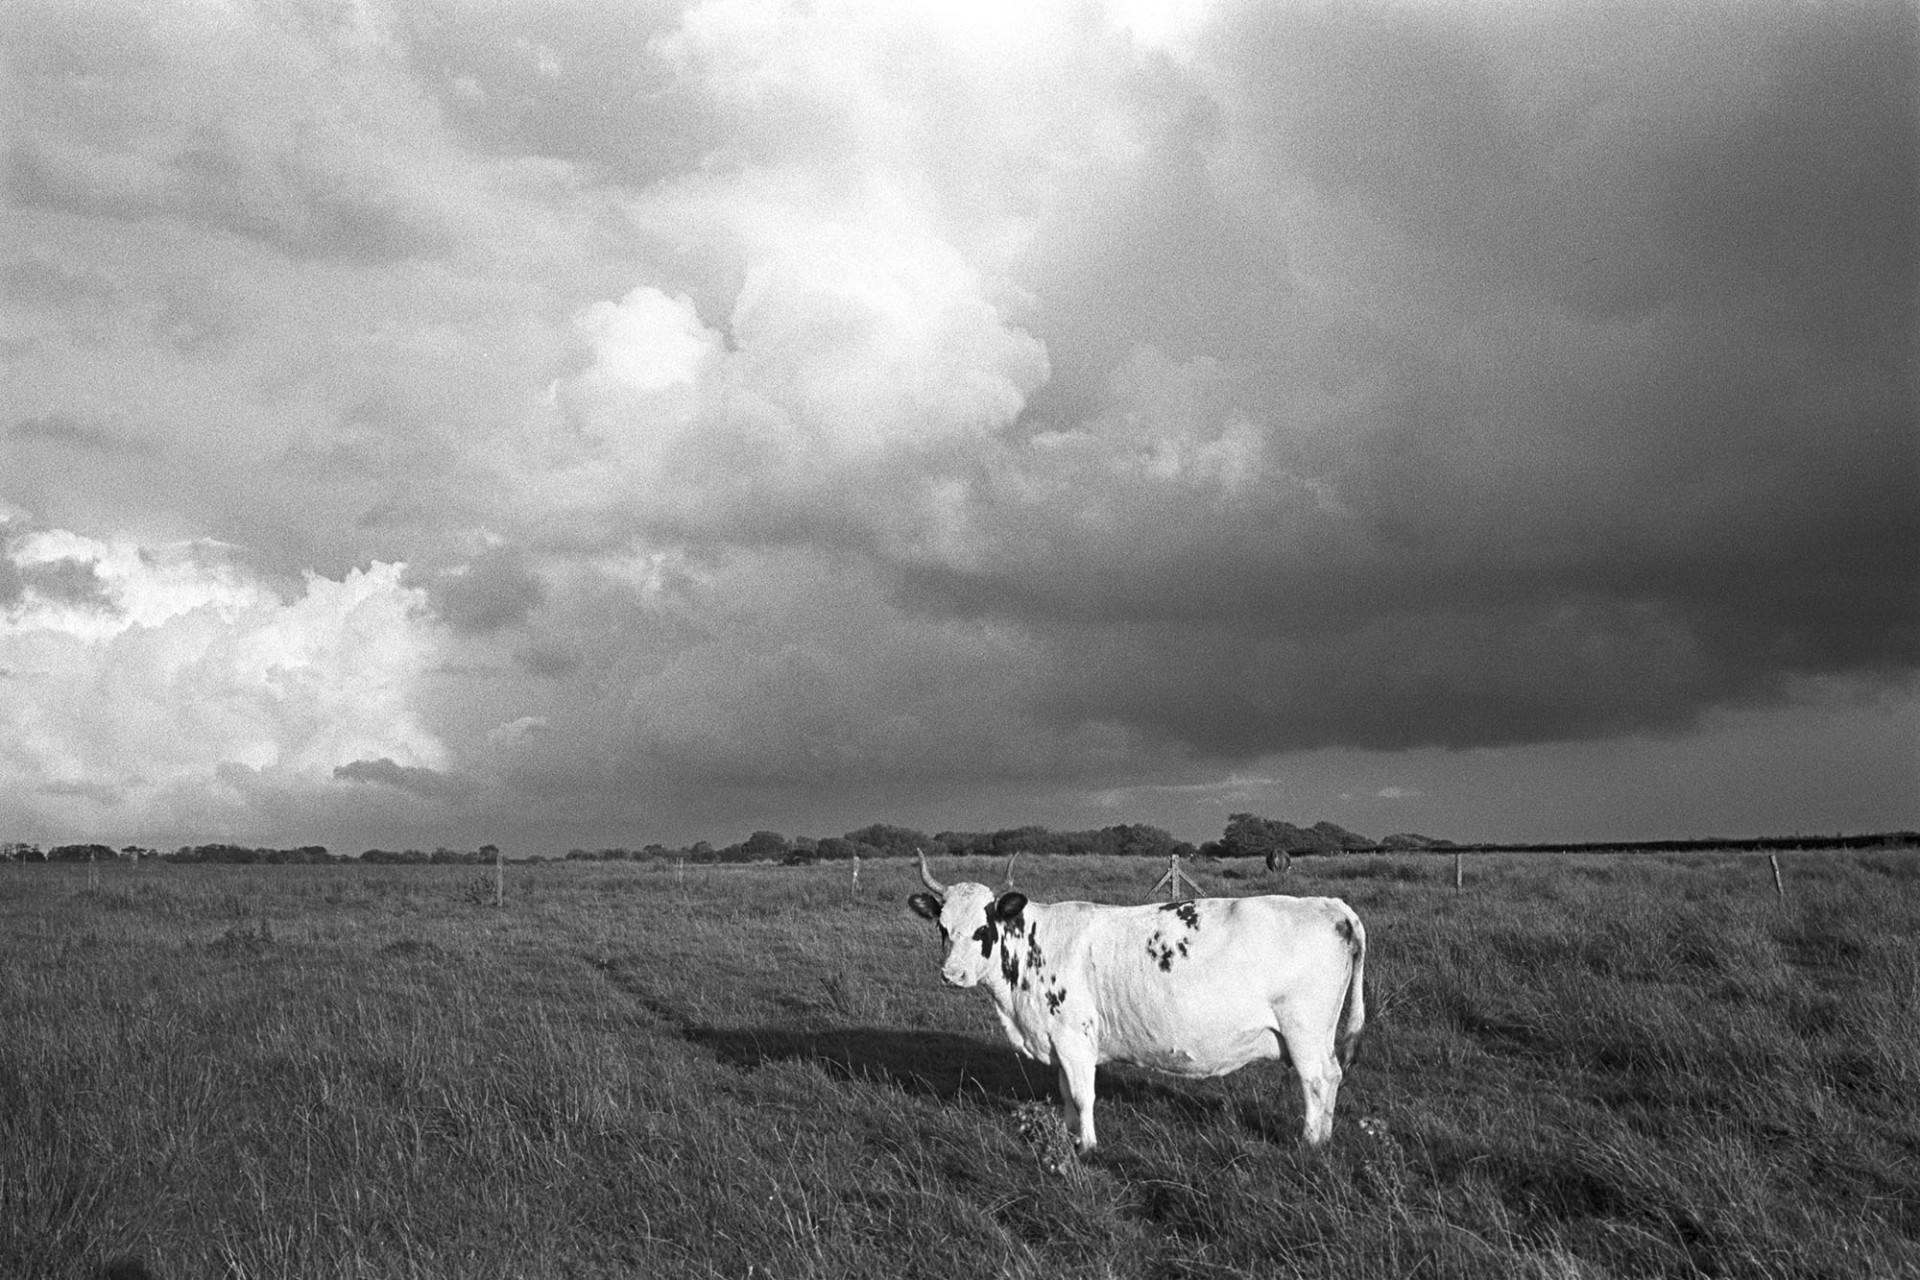 Cloudy landscape with cow with horns. 
[A cow with horns stood in a field at Cuppers Piece, Beaford. Trees are visible on the horizon and clouds are in the sky above.]